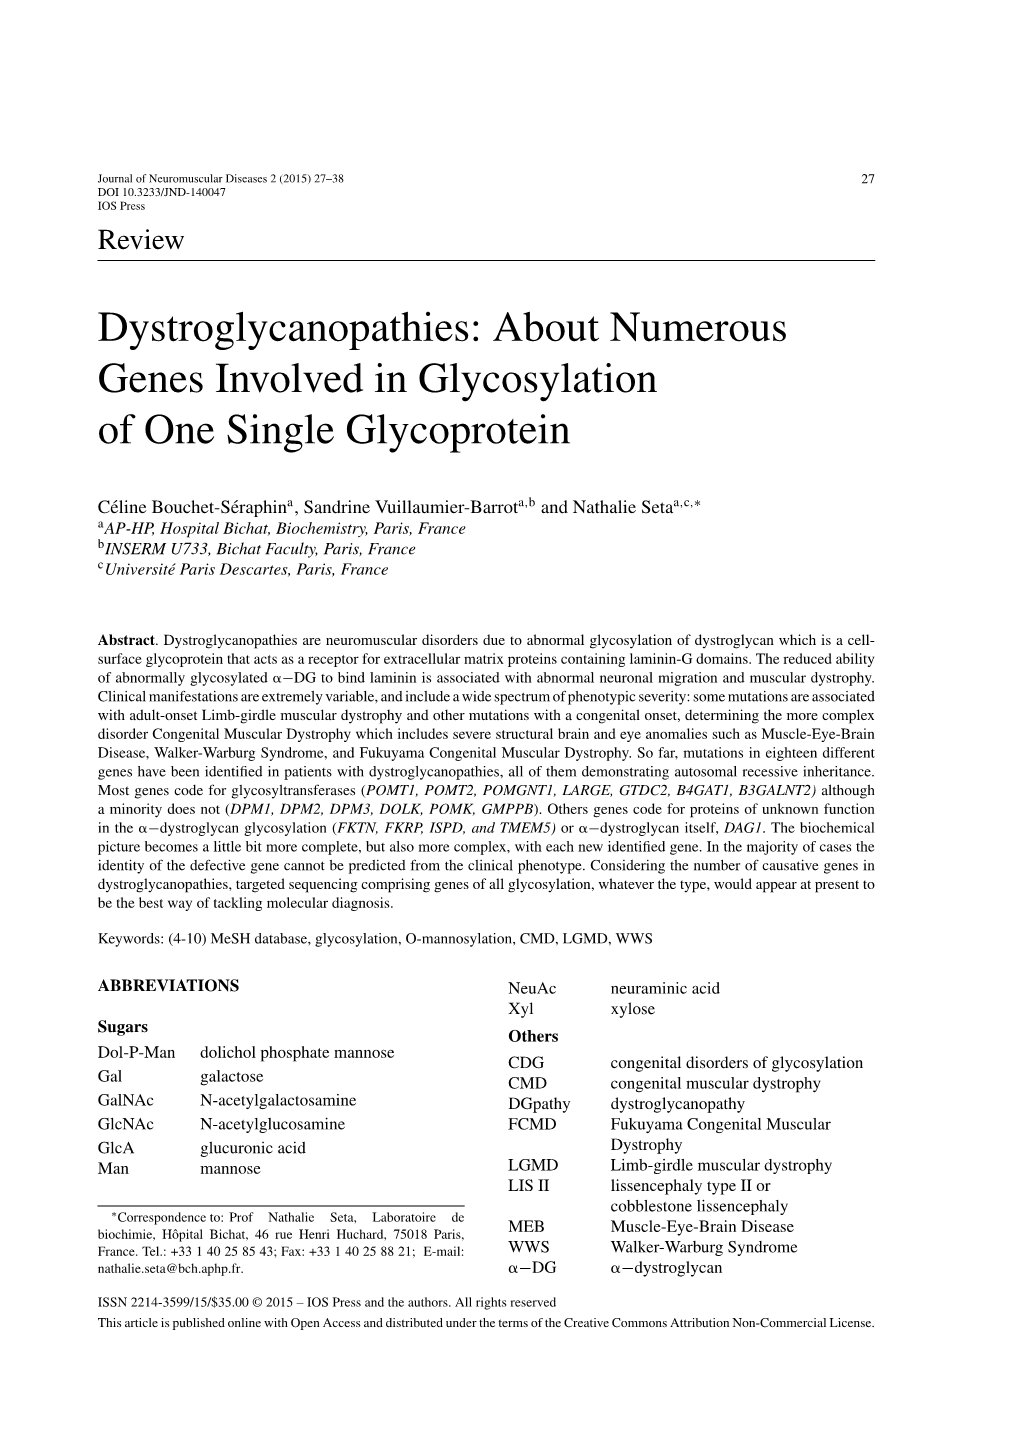 About Numerous Genes Involved in Glycosylation of One Single Glycoprotein